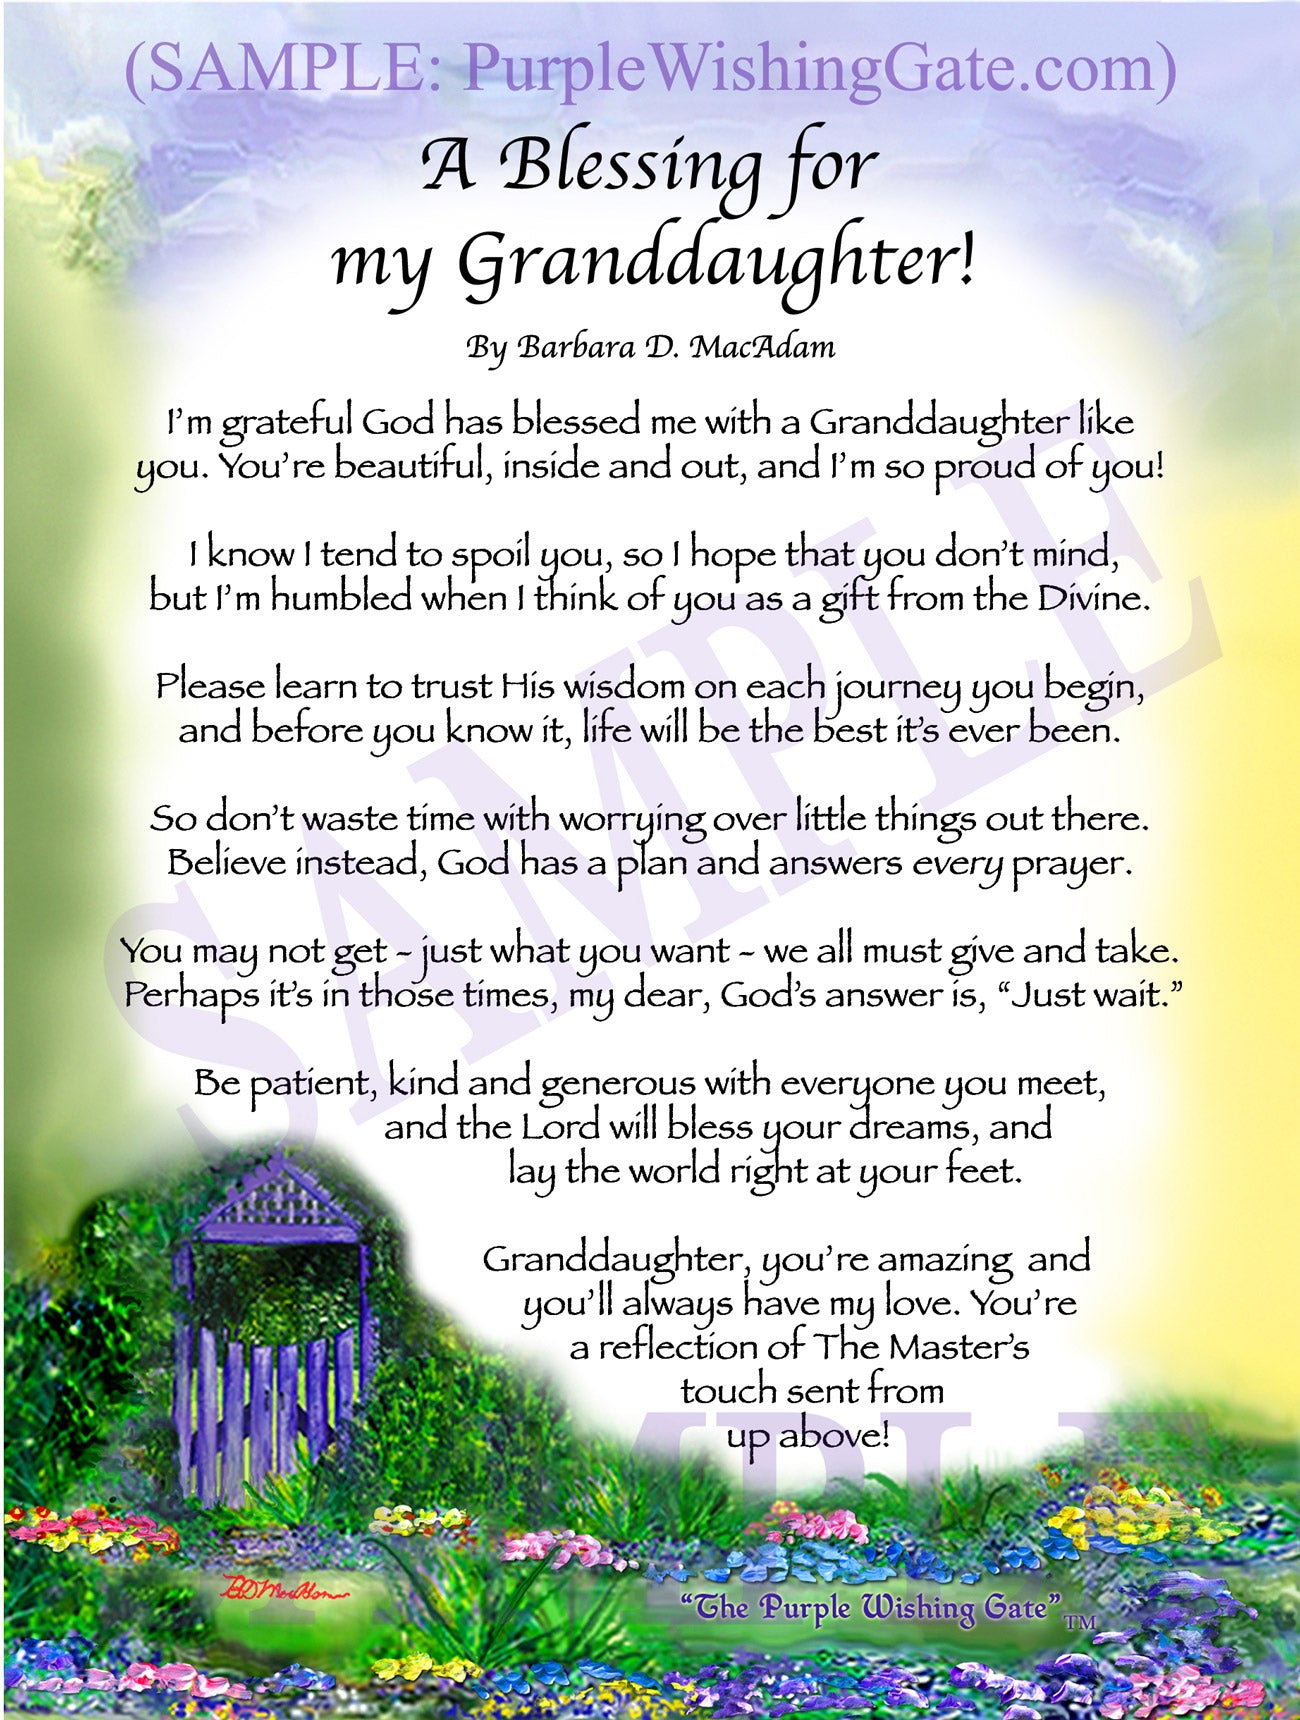 
              
        		A Blessing for My Granddaughter! (child-adult) - Gifts for Granddaughter - PurpleWishingGate.com
        		
        	